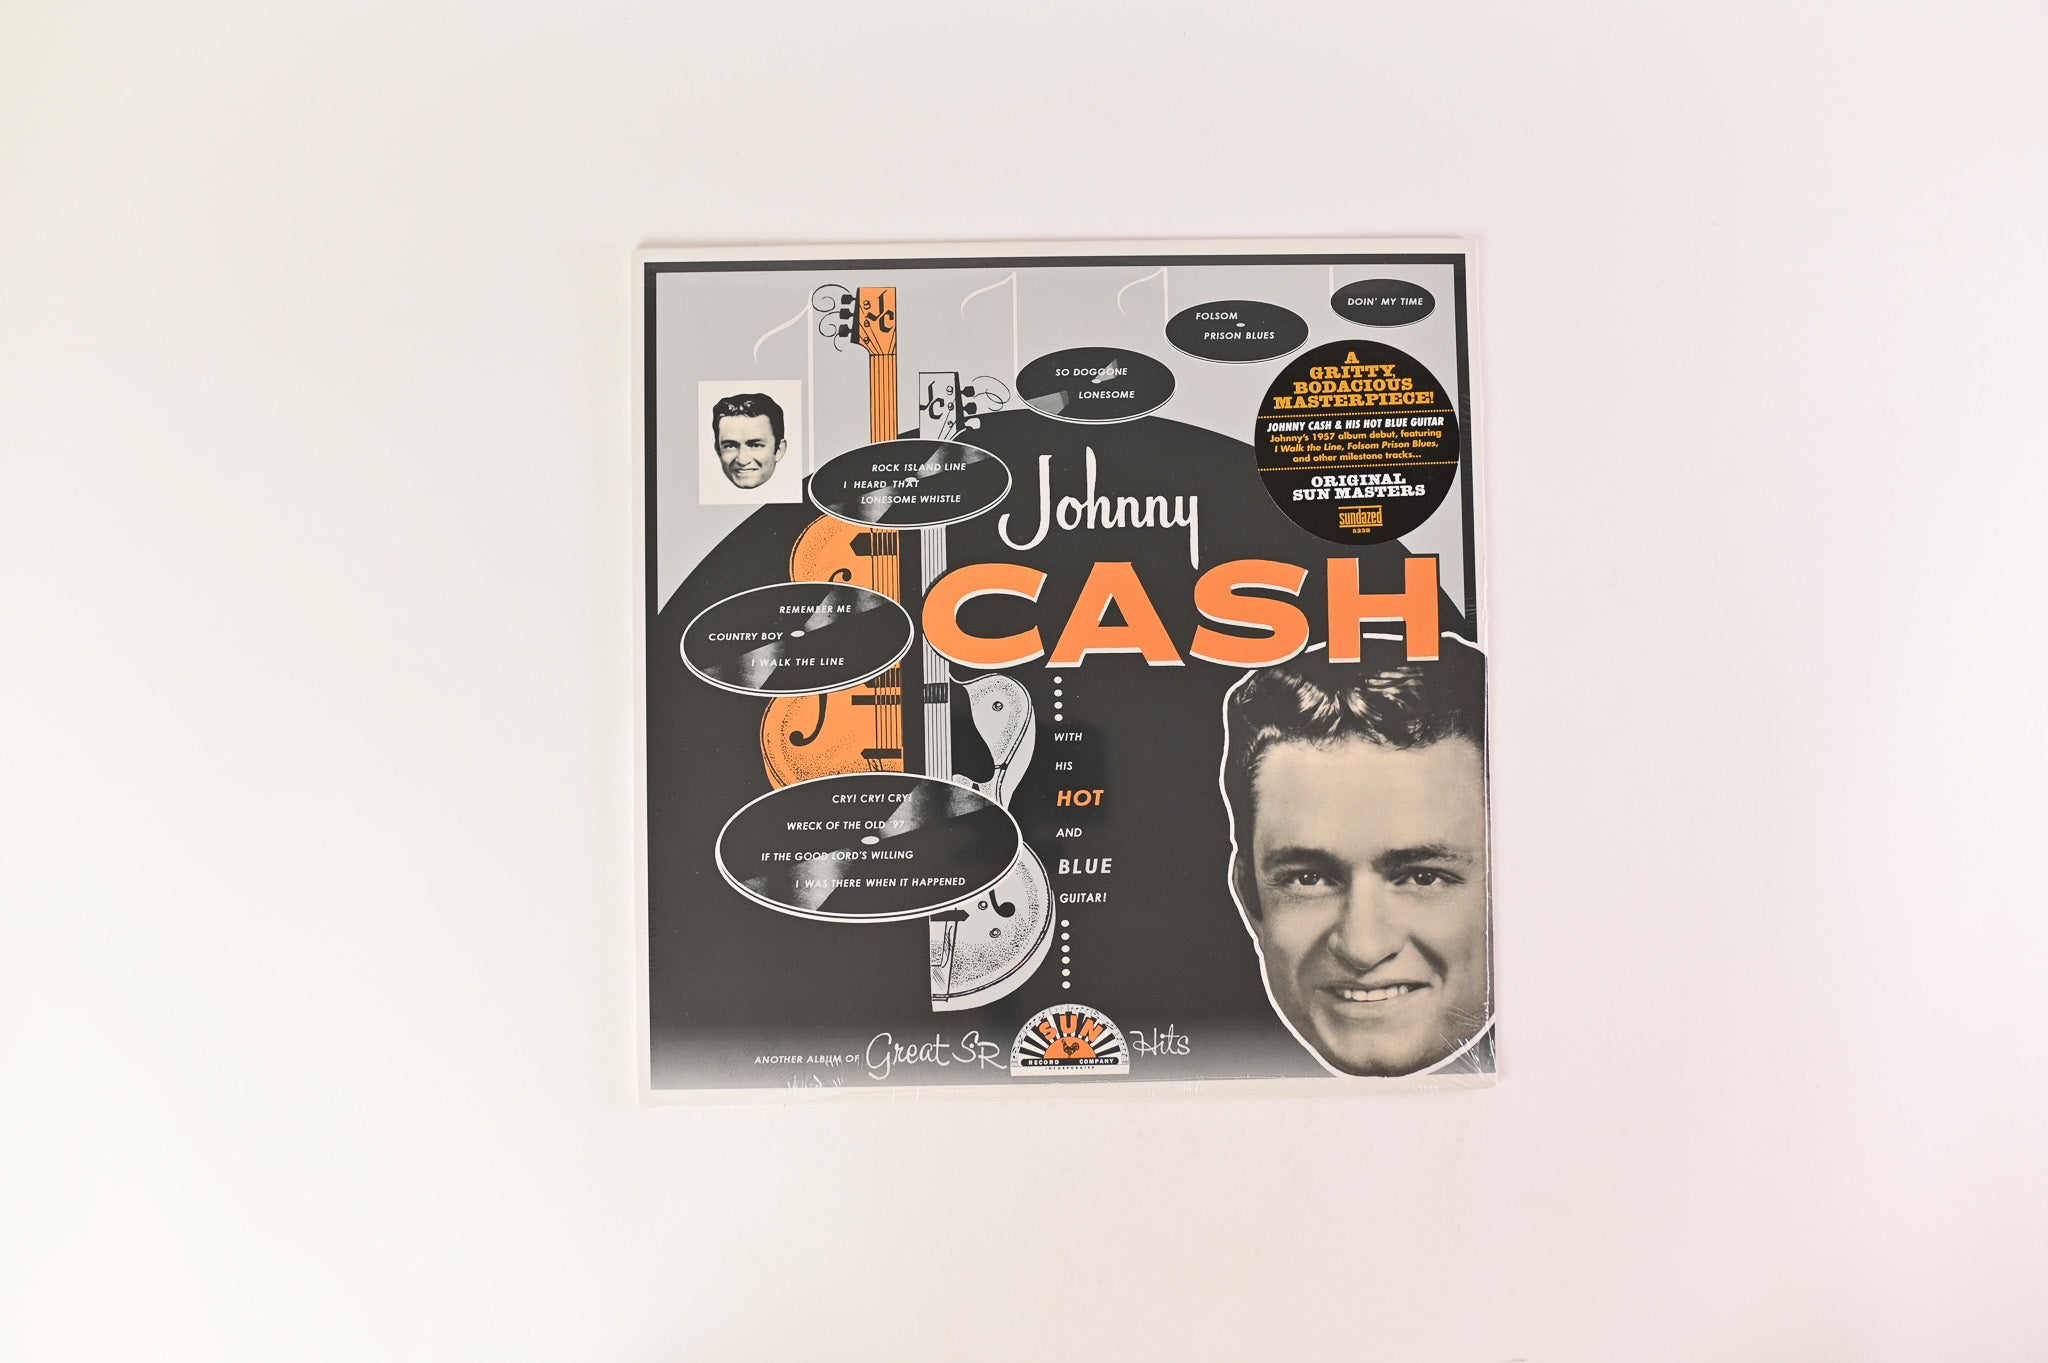 Johnny Cash - With His Hot And Blue Guitar SEALED Reissue on Sundazed